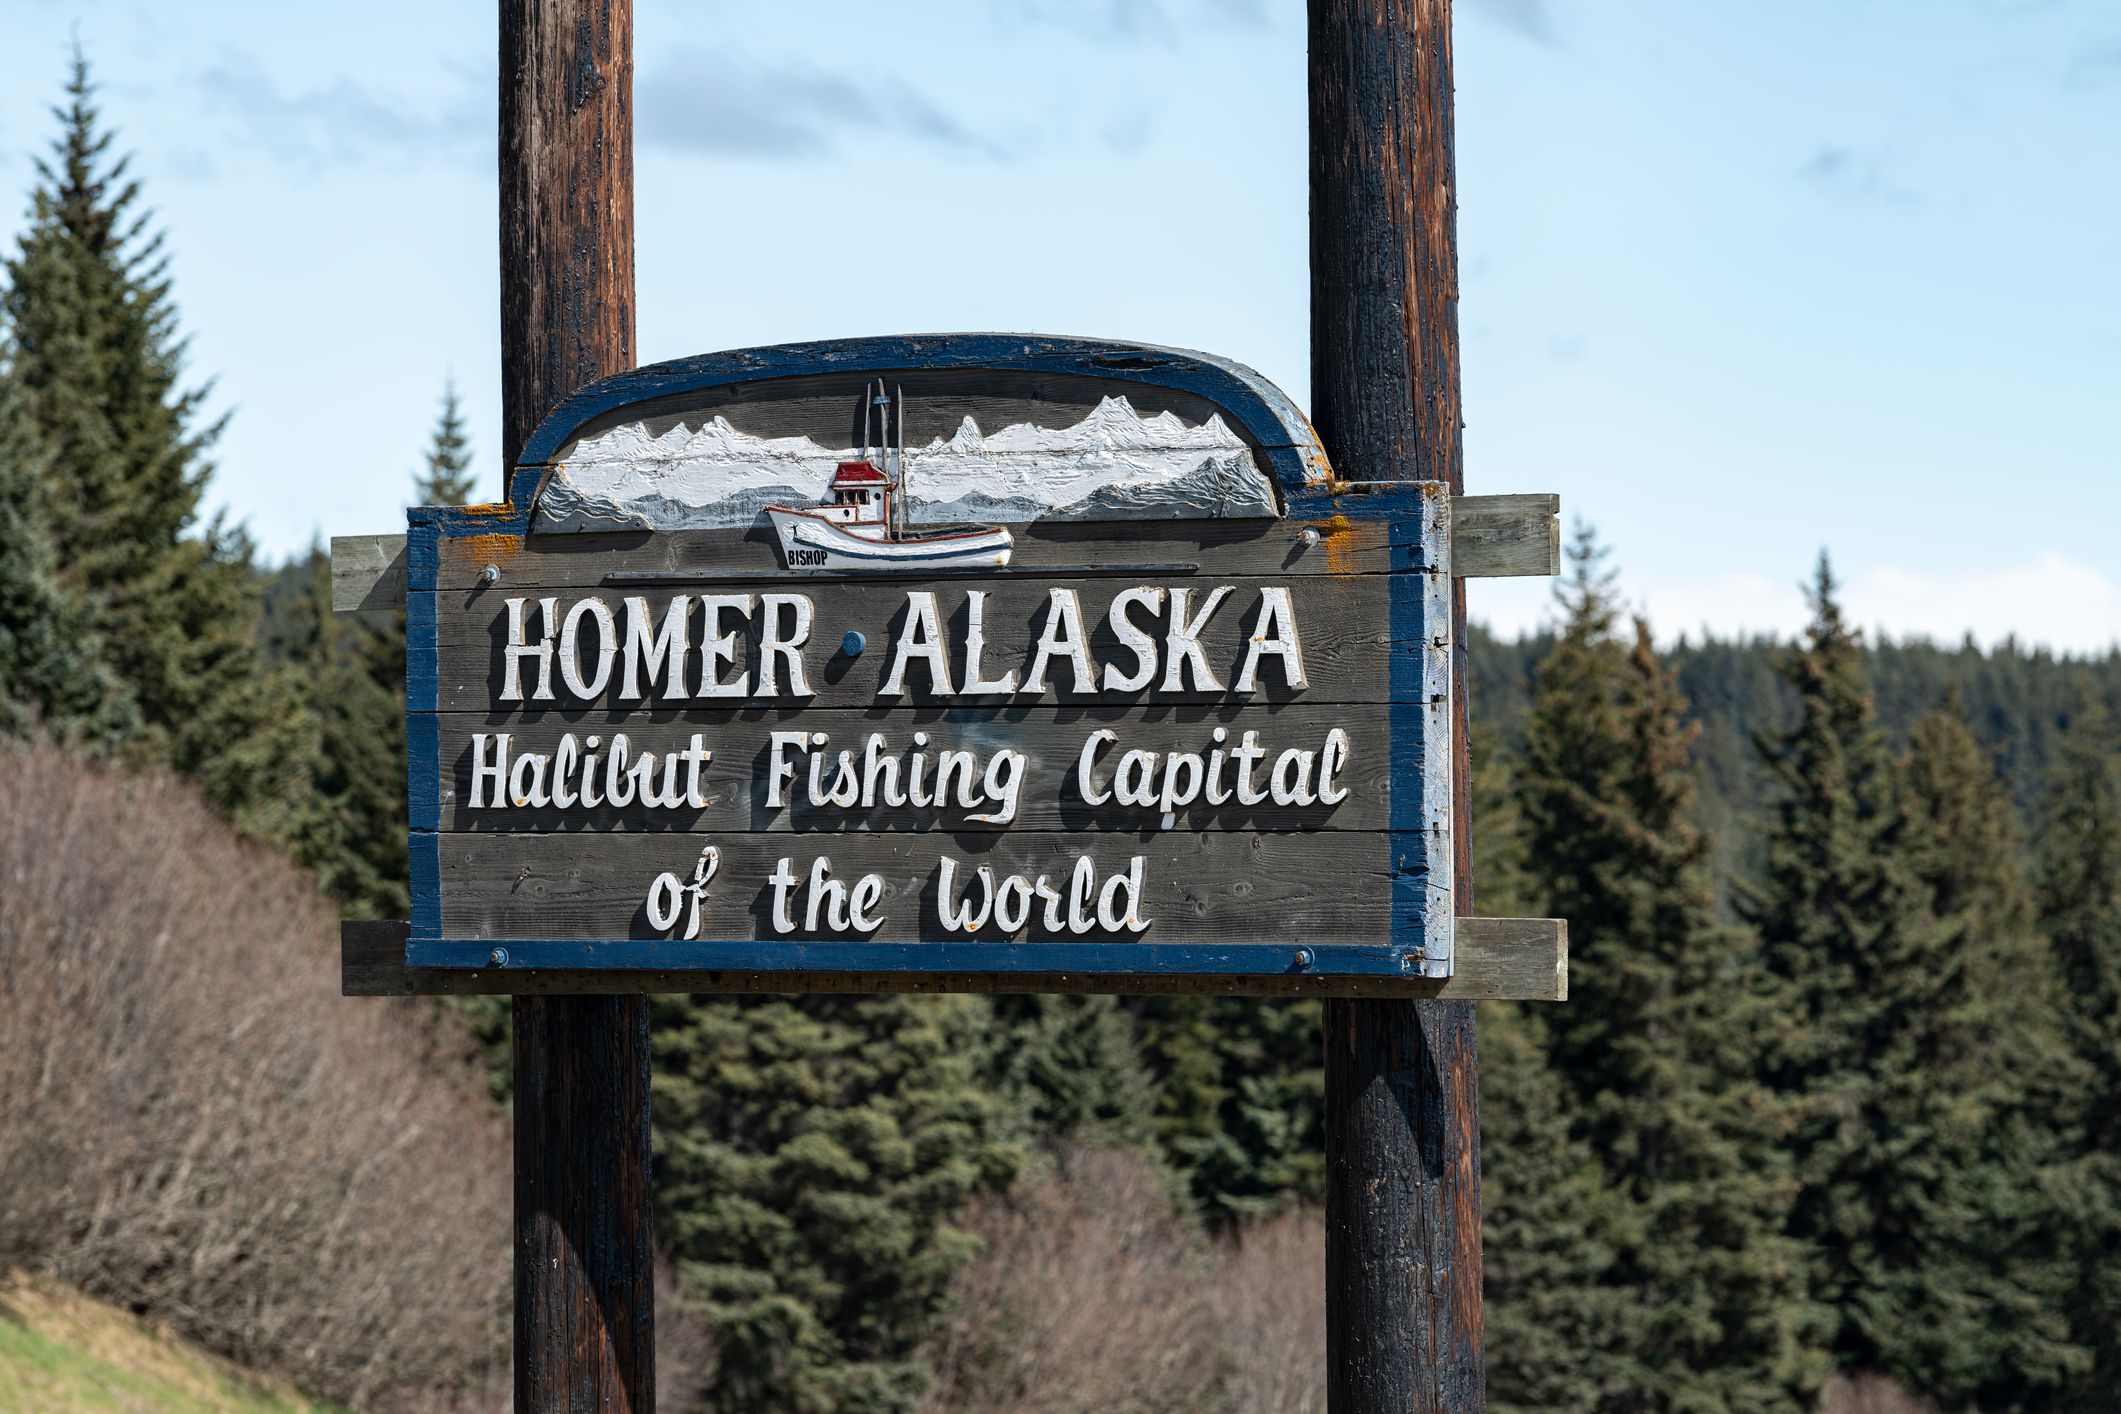 <p>Homer is situated on Alaska’s Kenai Peninsula, in close proximity to Kenai Fjords National Park. Though remote, Homer is stunning. You’ll drive about 1.5 hours to get to Kenai or Soldotna, 3.5 hours to get to Seward, and 4 hours to get to Anchorage.</p><ul><li>Population: 5,876</li><li>Median Household Income: $63,854</li><li>Cost of Living: 126.7% of U.S. average</li><li>Median Rent Price: $1,136</li><li>Home Price-to-Income Ratio: 4.85</li><li>Average Property Tax: 0.70%</li></ul><p class="padding-top-ms"><b>Housing Affordability</b>: Rent in Homer is very manageable by Alaskan standards, but its remote location means homes are expensive. The median home price in Homer is $309,500.</p>